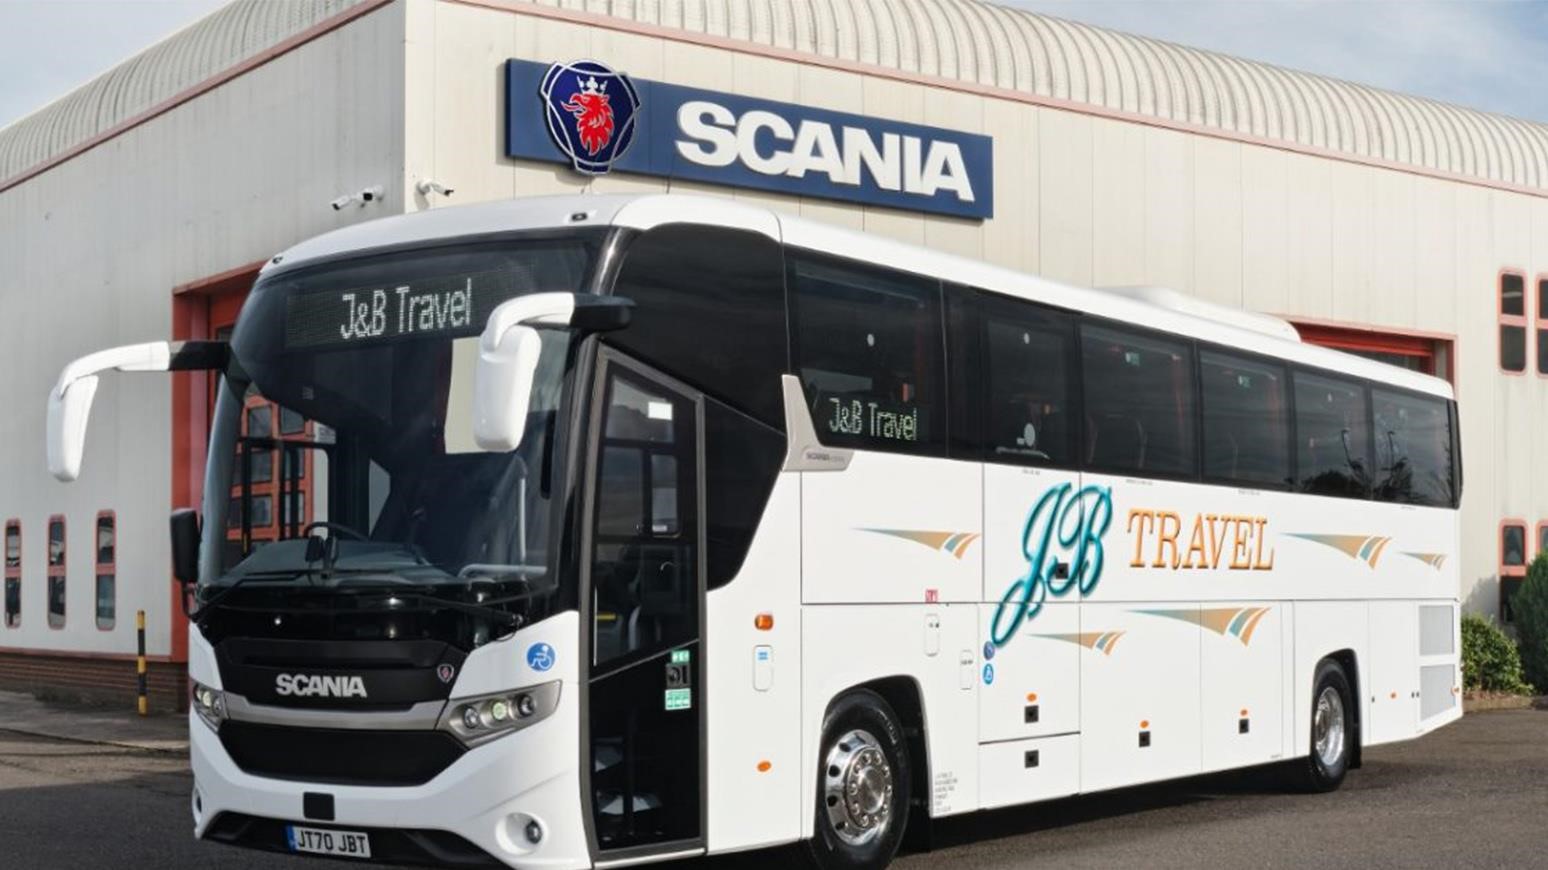 Leeds-Based Coach Hire Company’s Fleet Grows By One Scania Interlink HD Bus